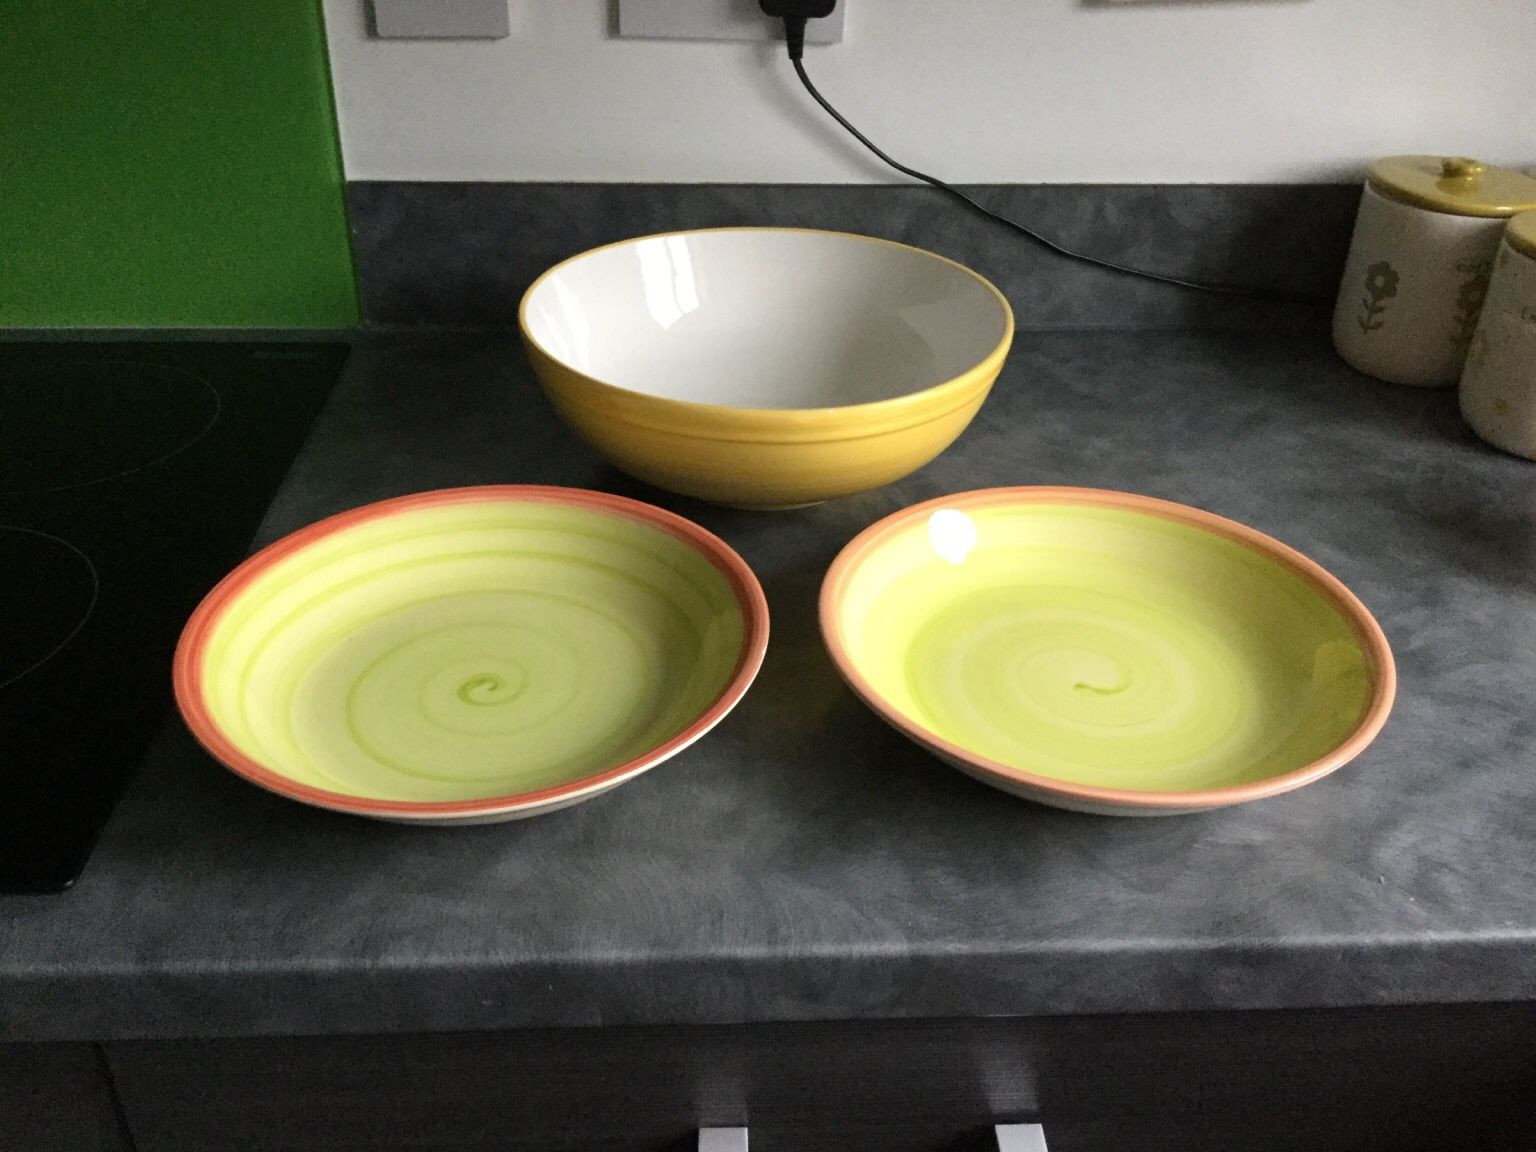 plum vases and bowls of https en shpock com i w6n0iktubxrapvwp 2018 09 20t174250 inside large yellow bowl plus 2large dishes